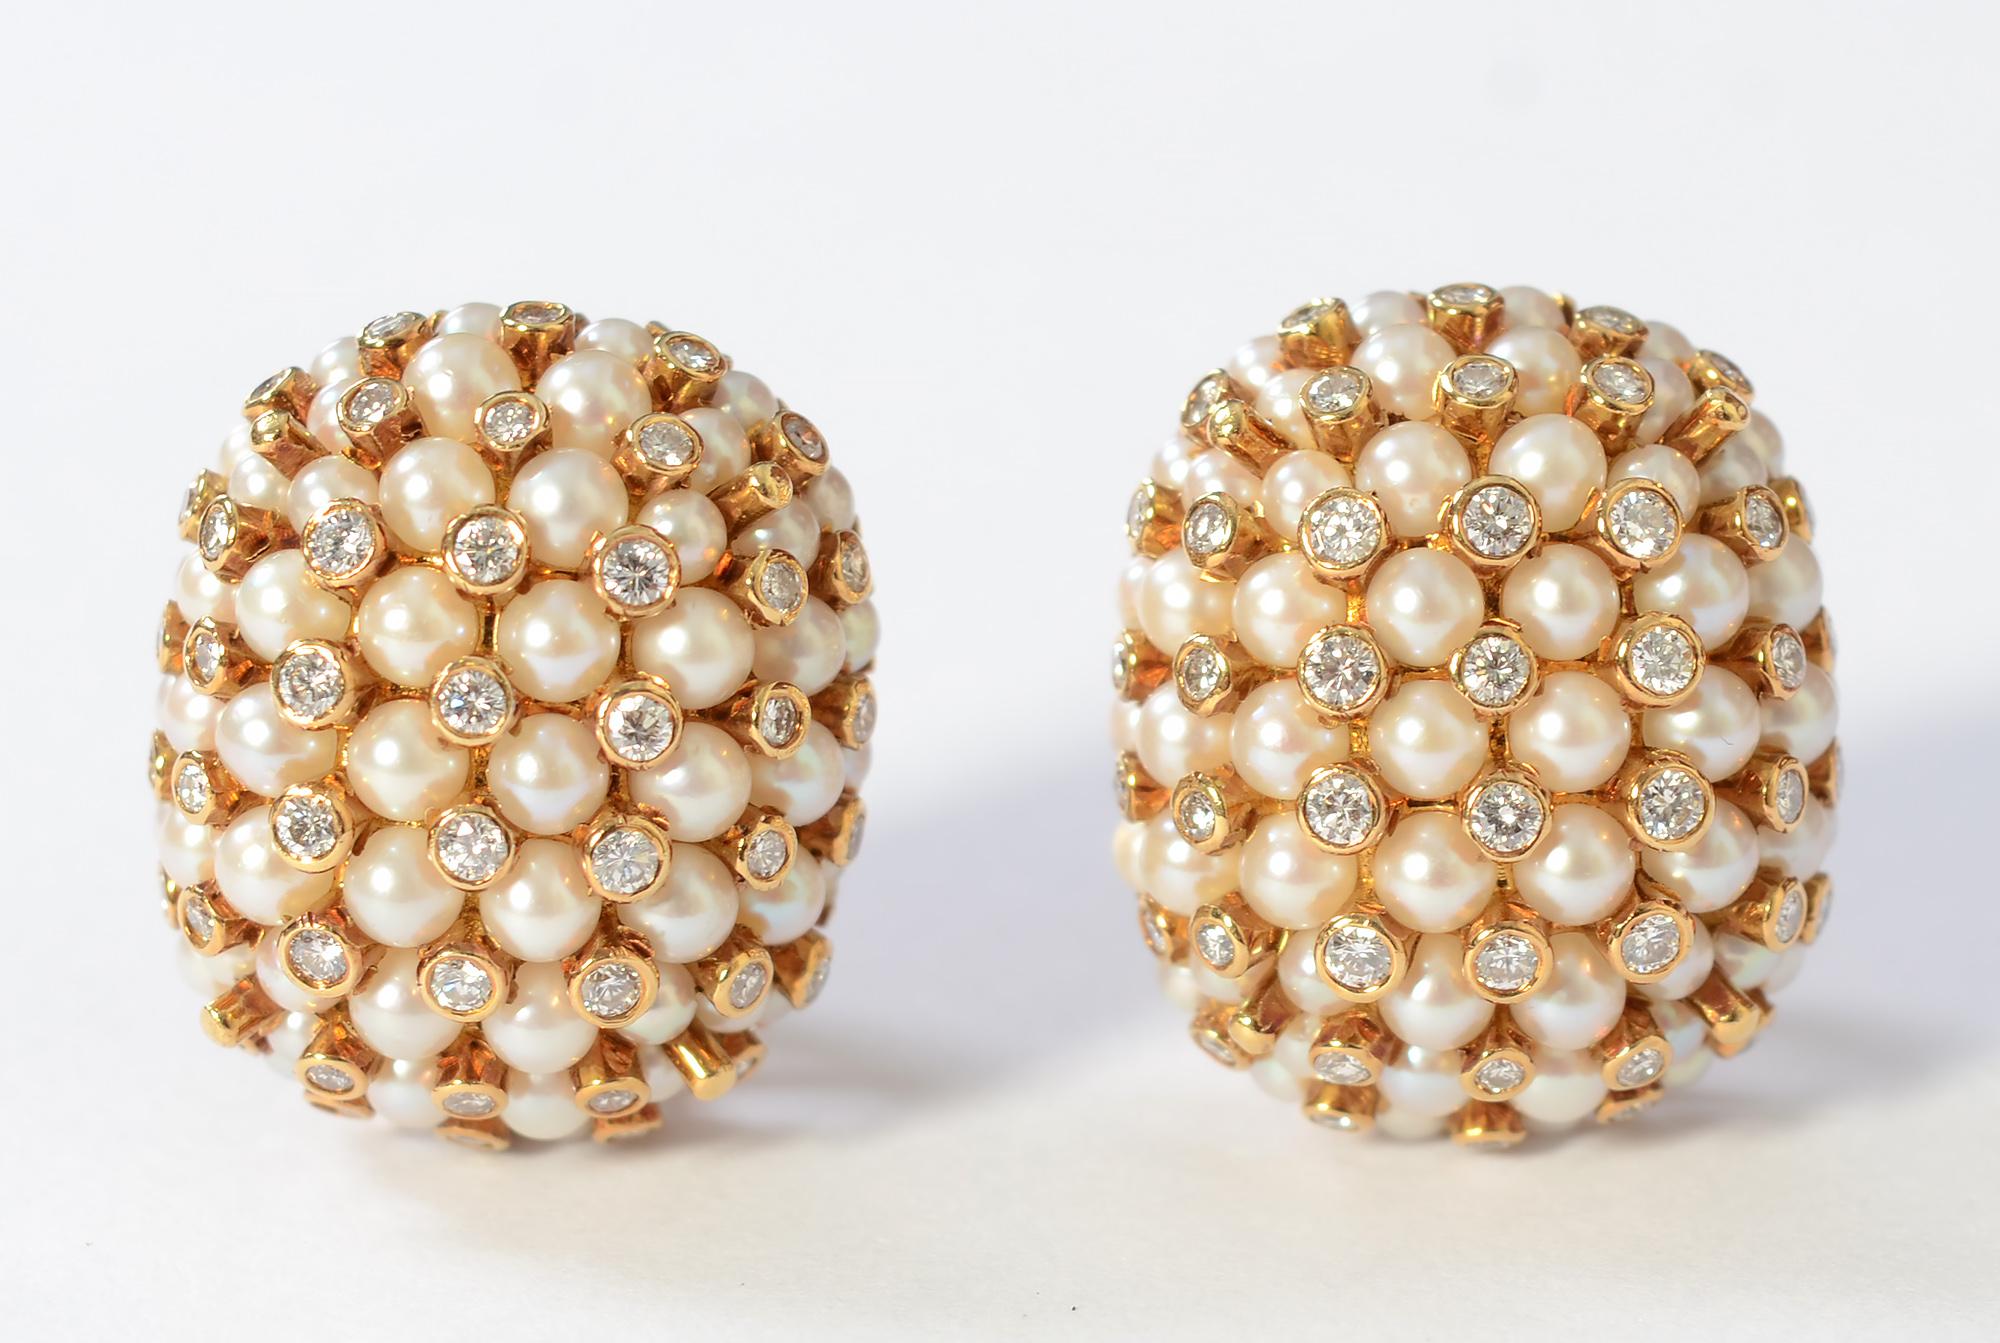 Chic pearl earrings interspersed with diamonds to give them a lovely sparkle. The earrings are 13/16